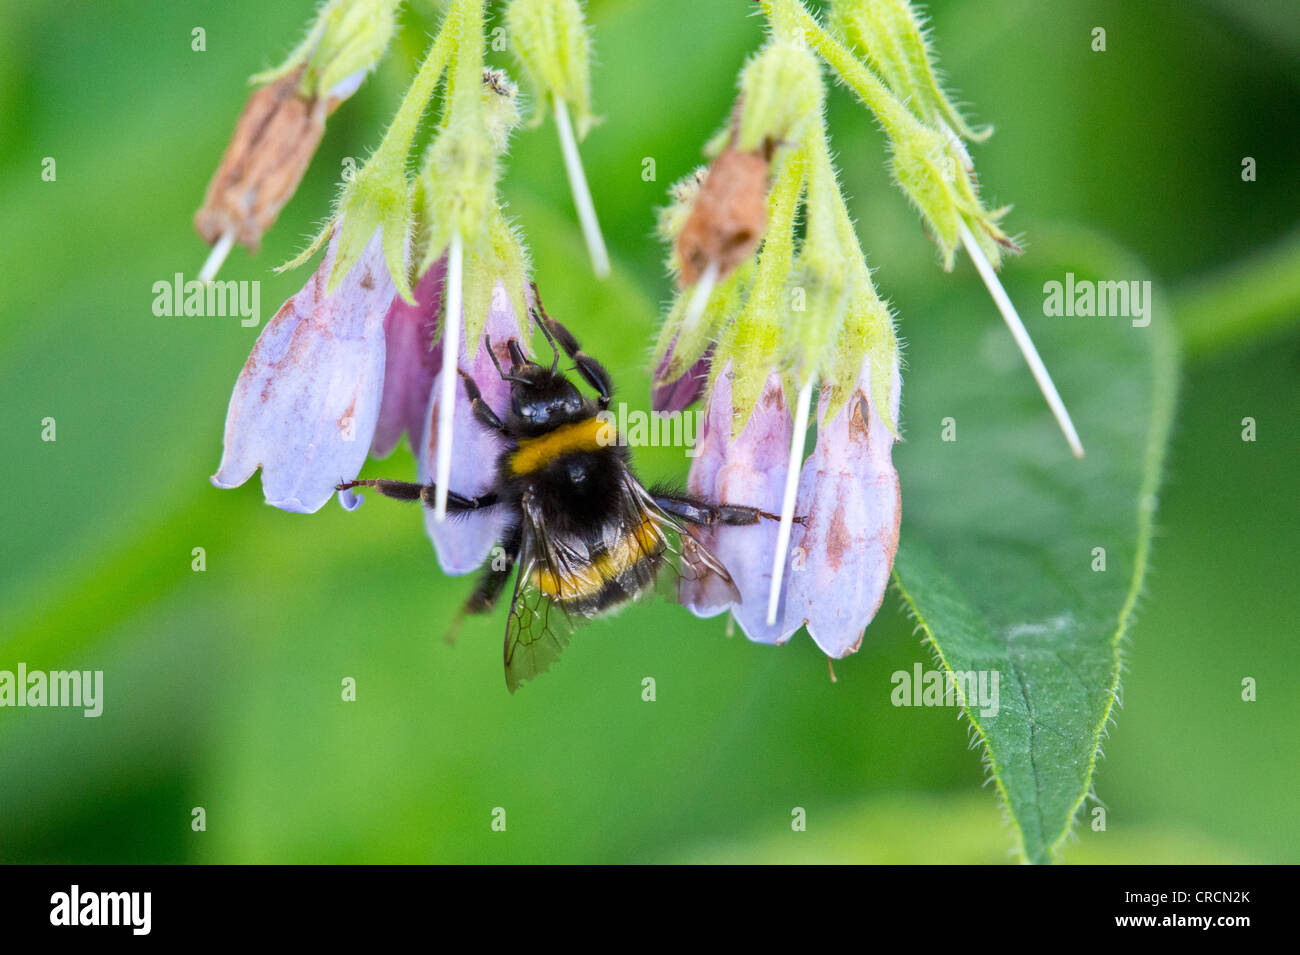 Bumblebees drinking nectar from flowers Stock Photo